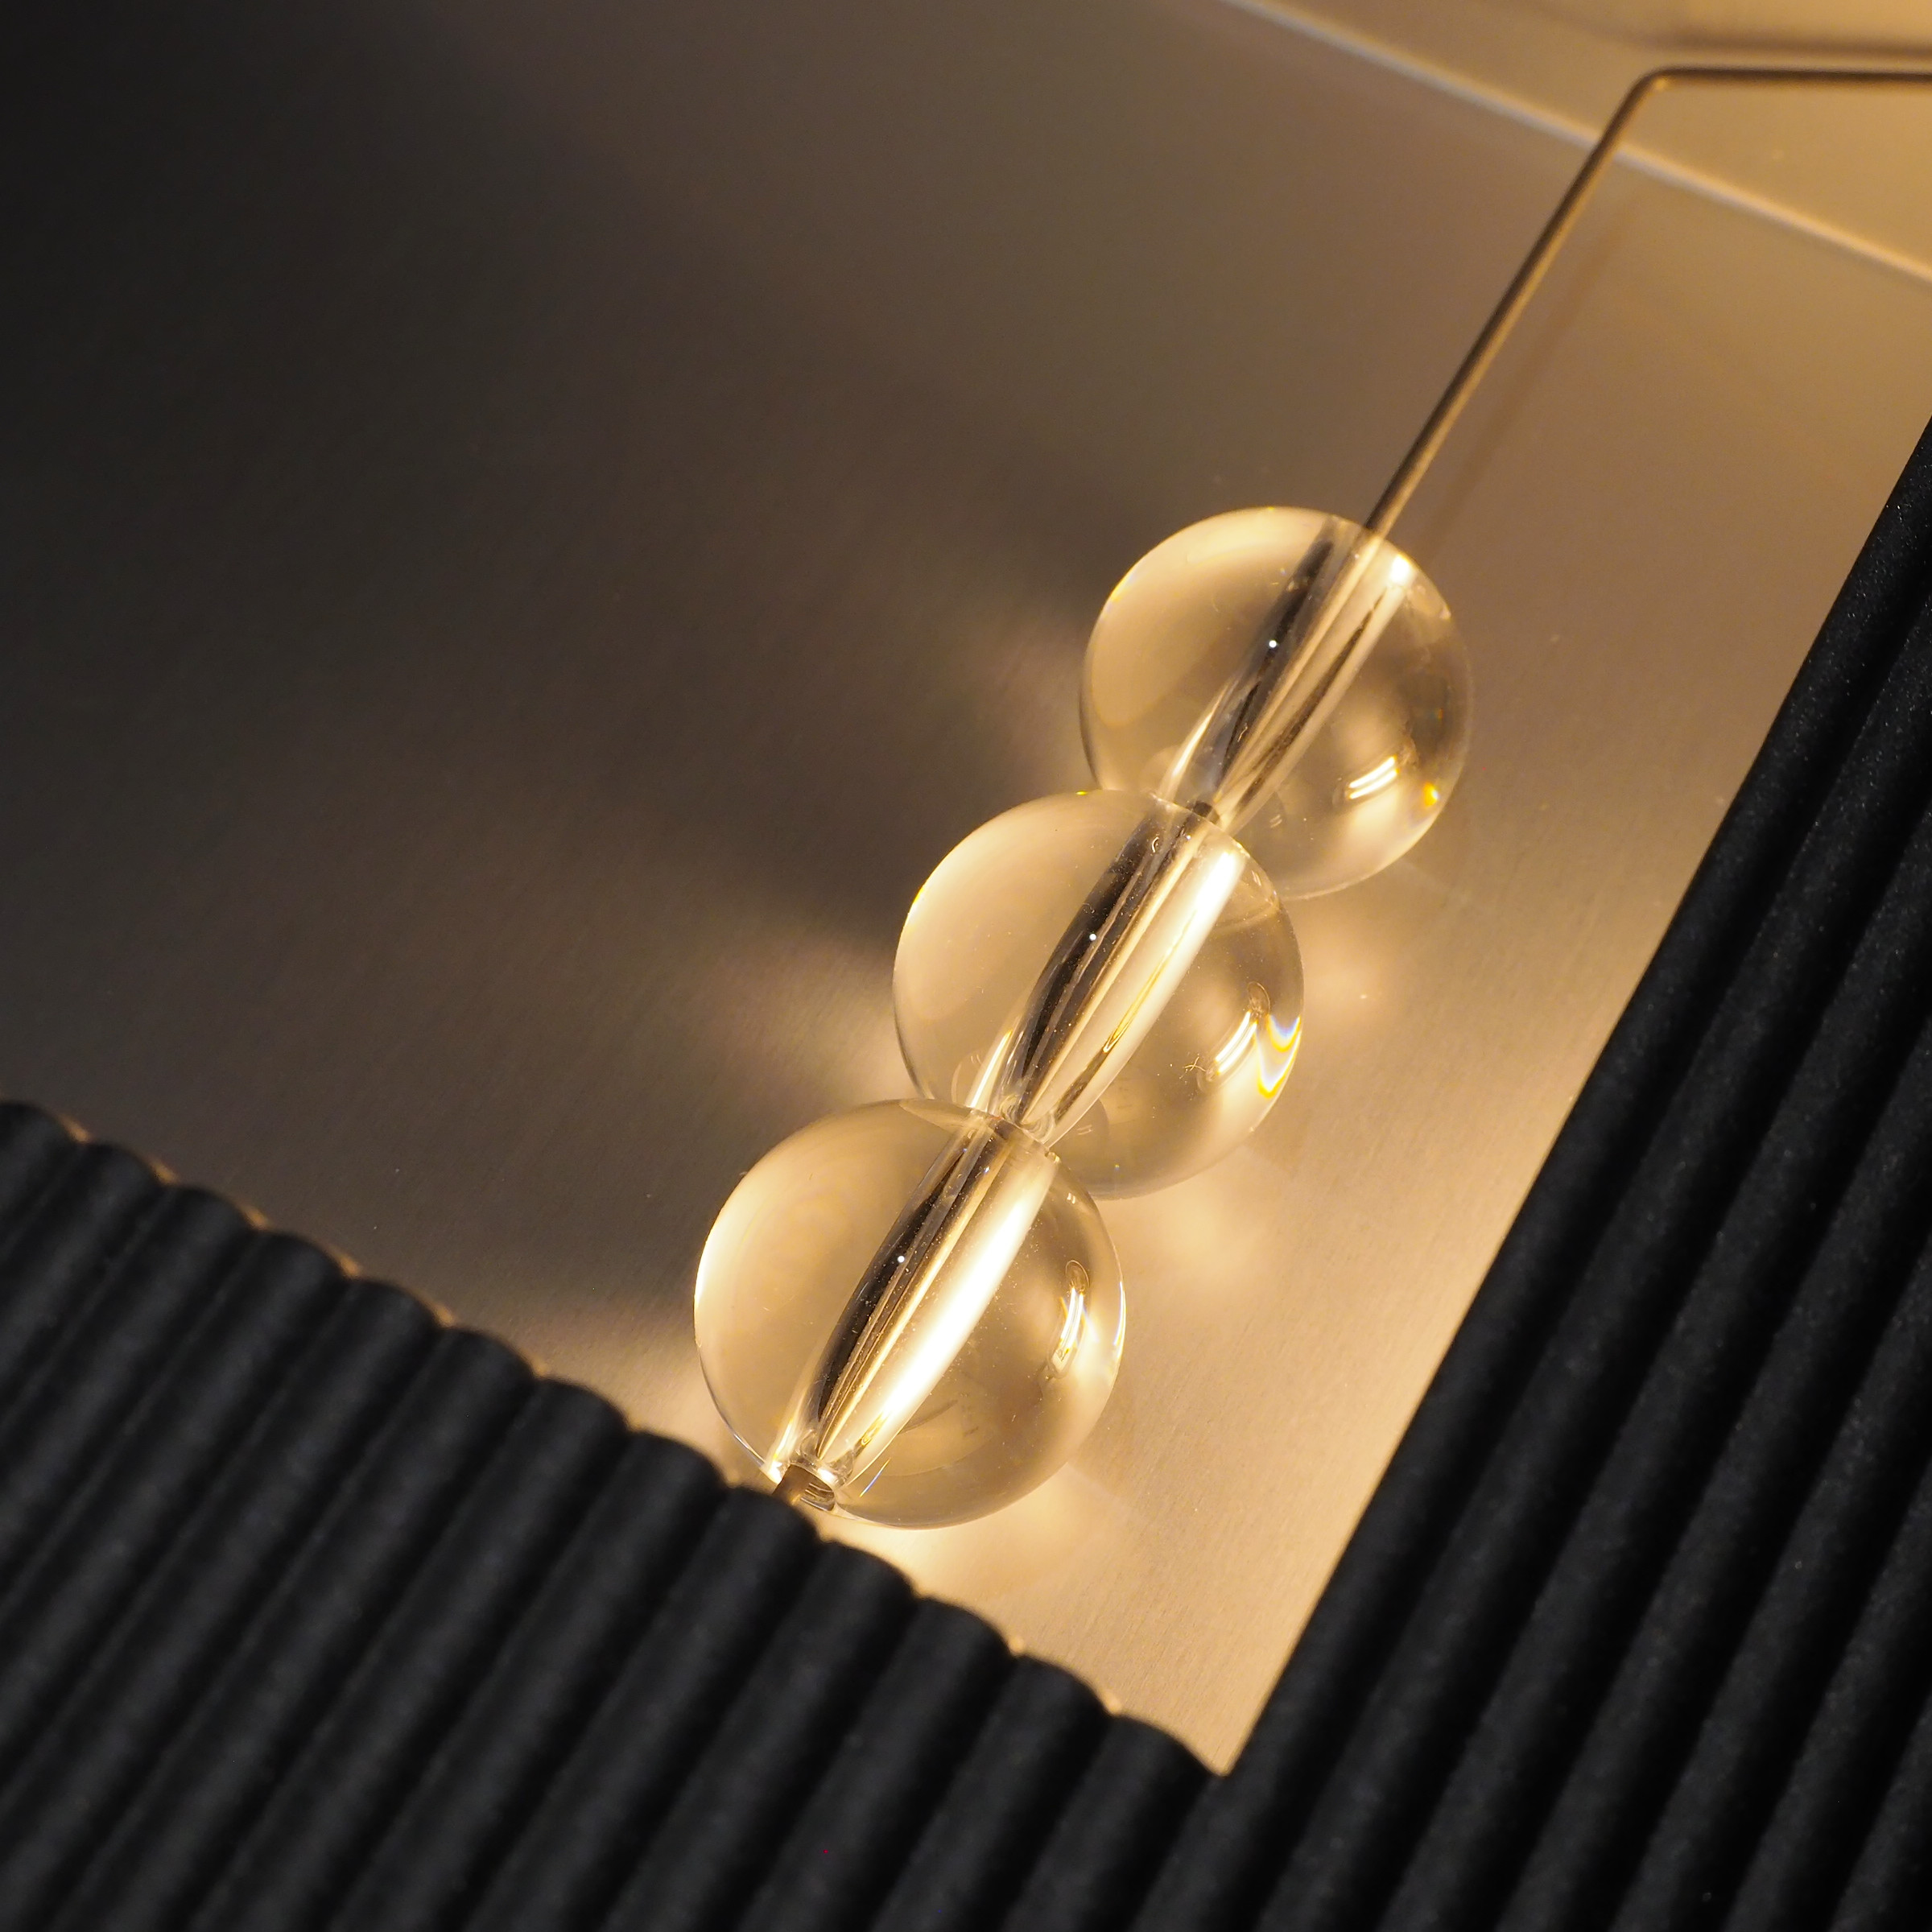 Wall light 'Very Well' in metal and transparent glass beads by Belux